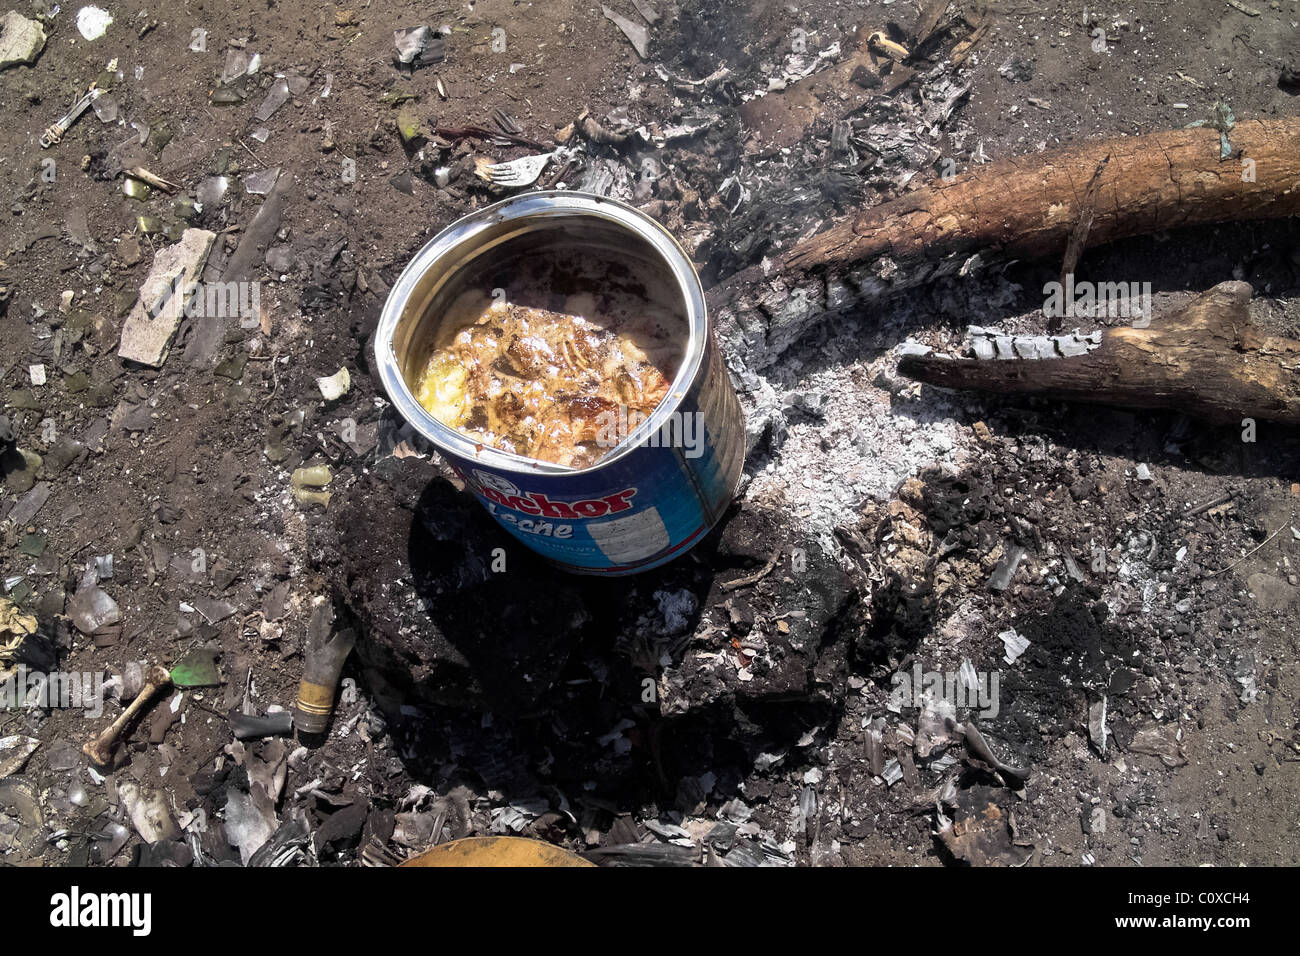 A chicken soup boiled in a can in the garbage dump La Chureca, Managua, Nicaragua. Stock Photo